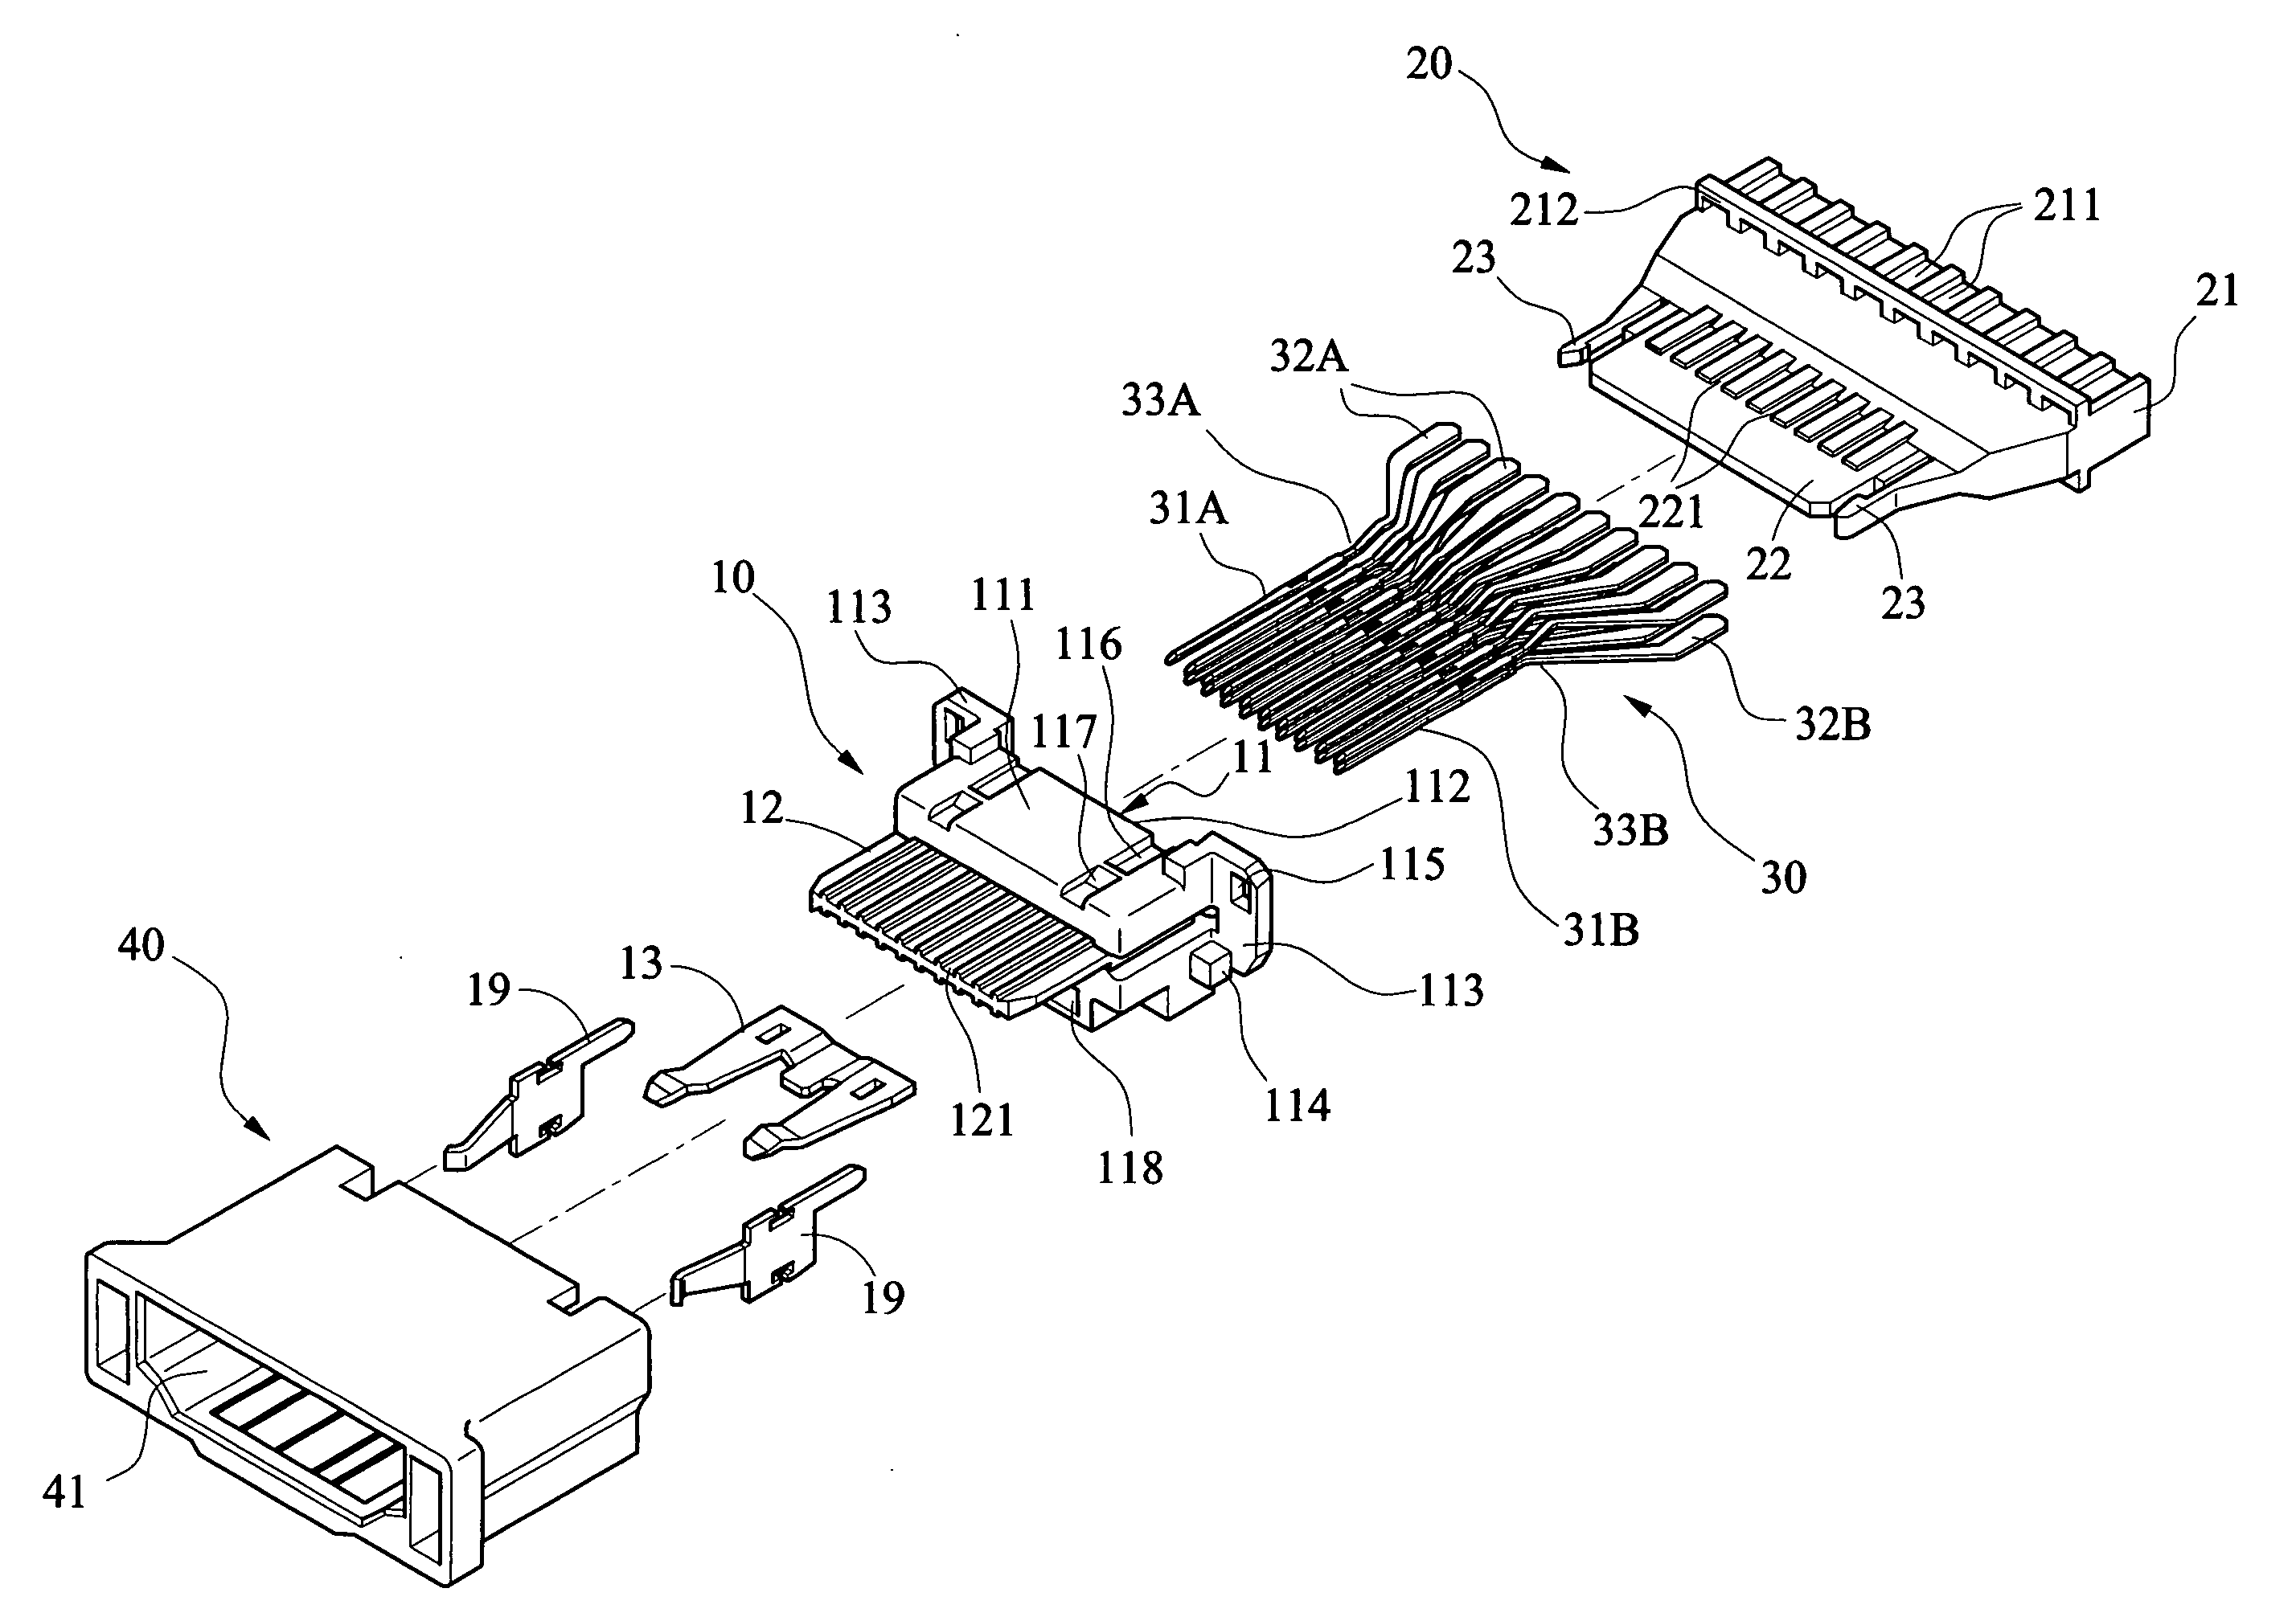 HDMI connector assembly